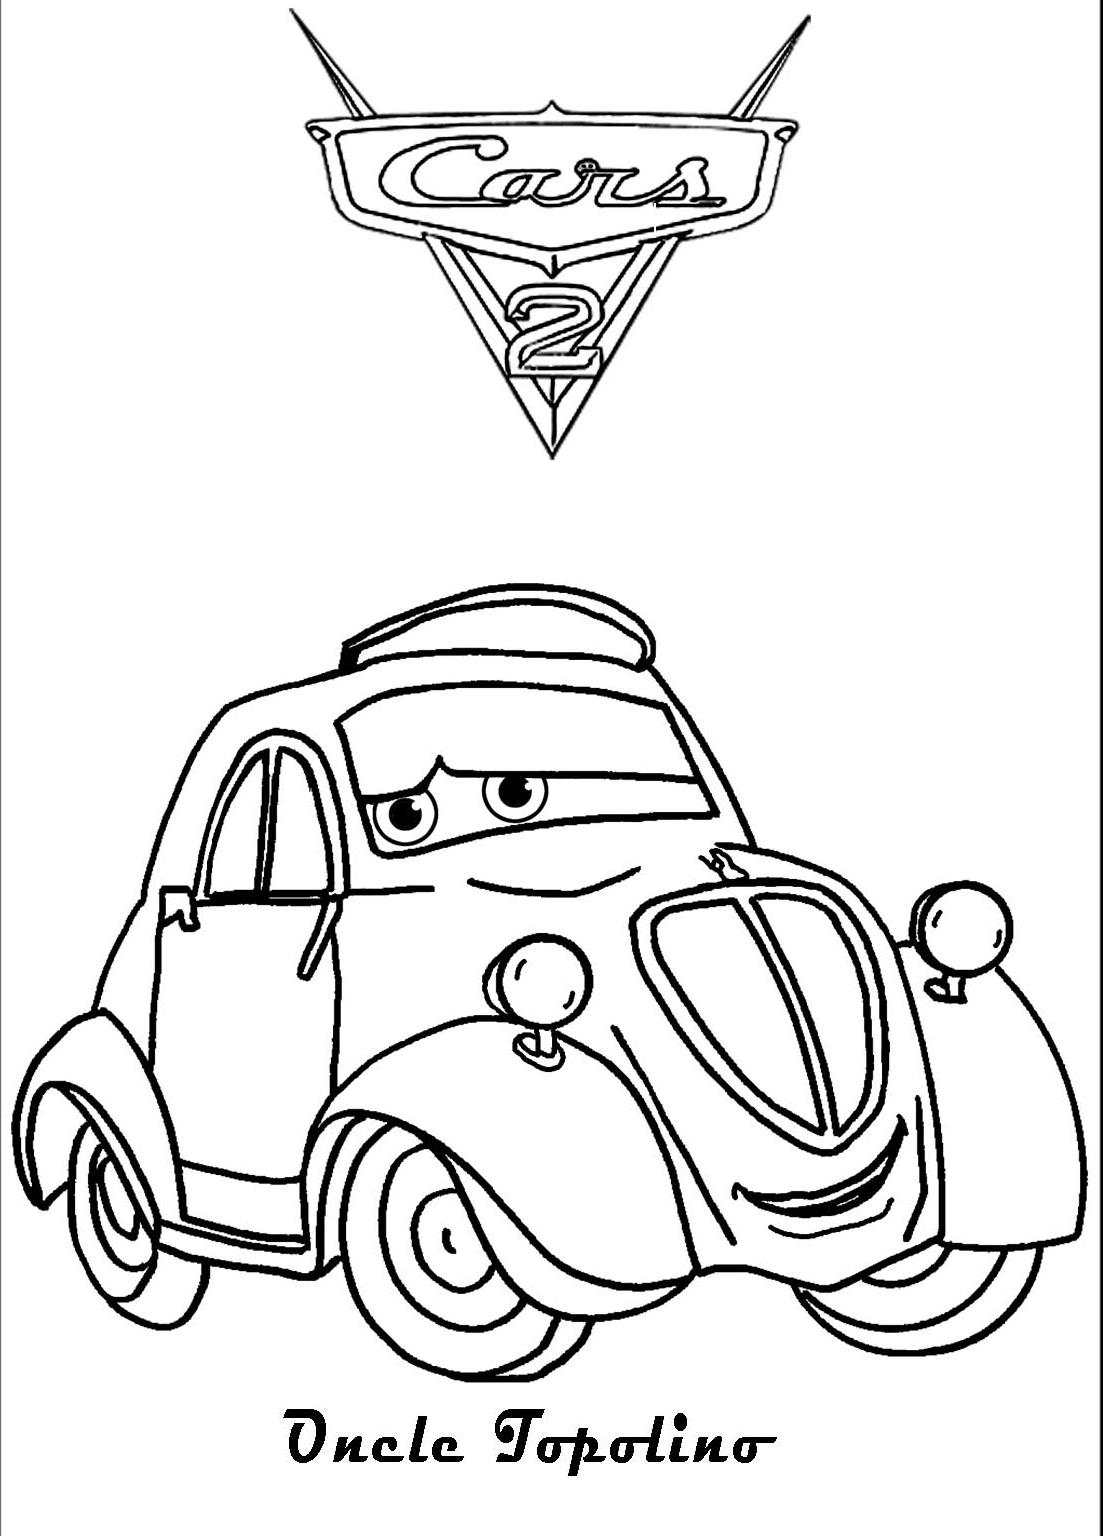 uncle grandpa coloring pages for kids - photo #36